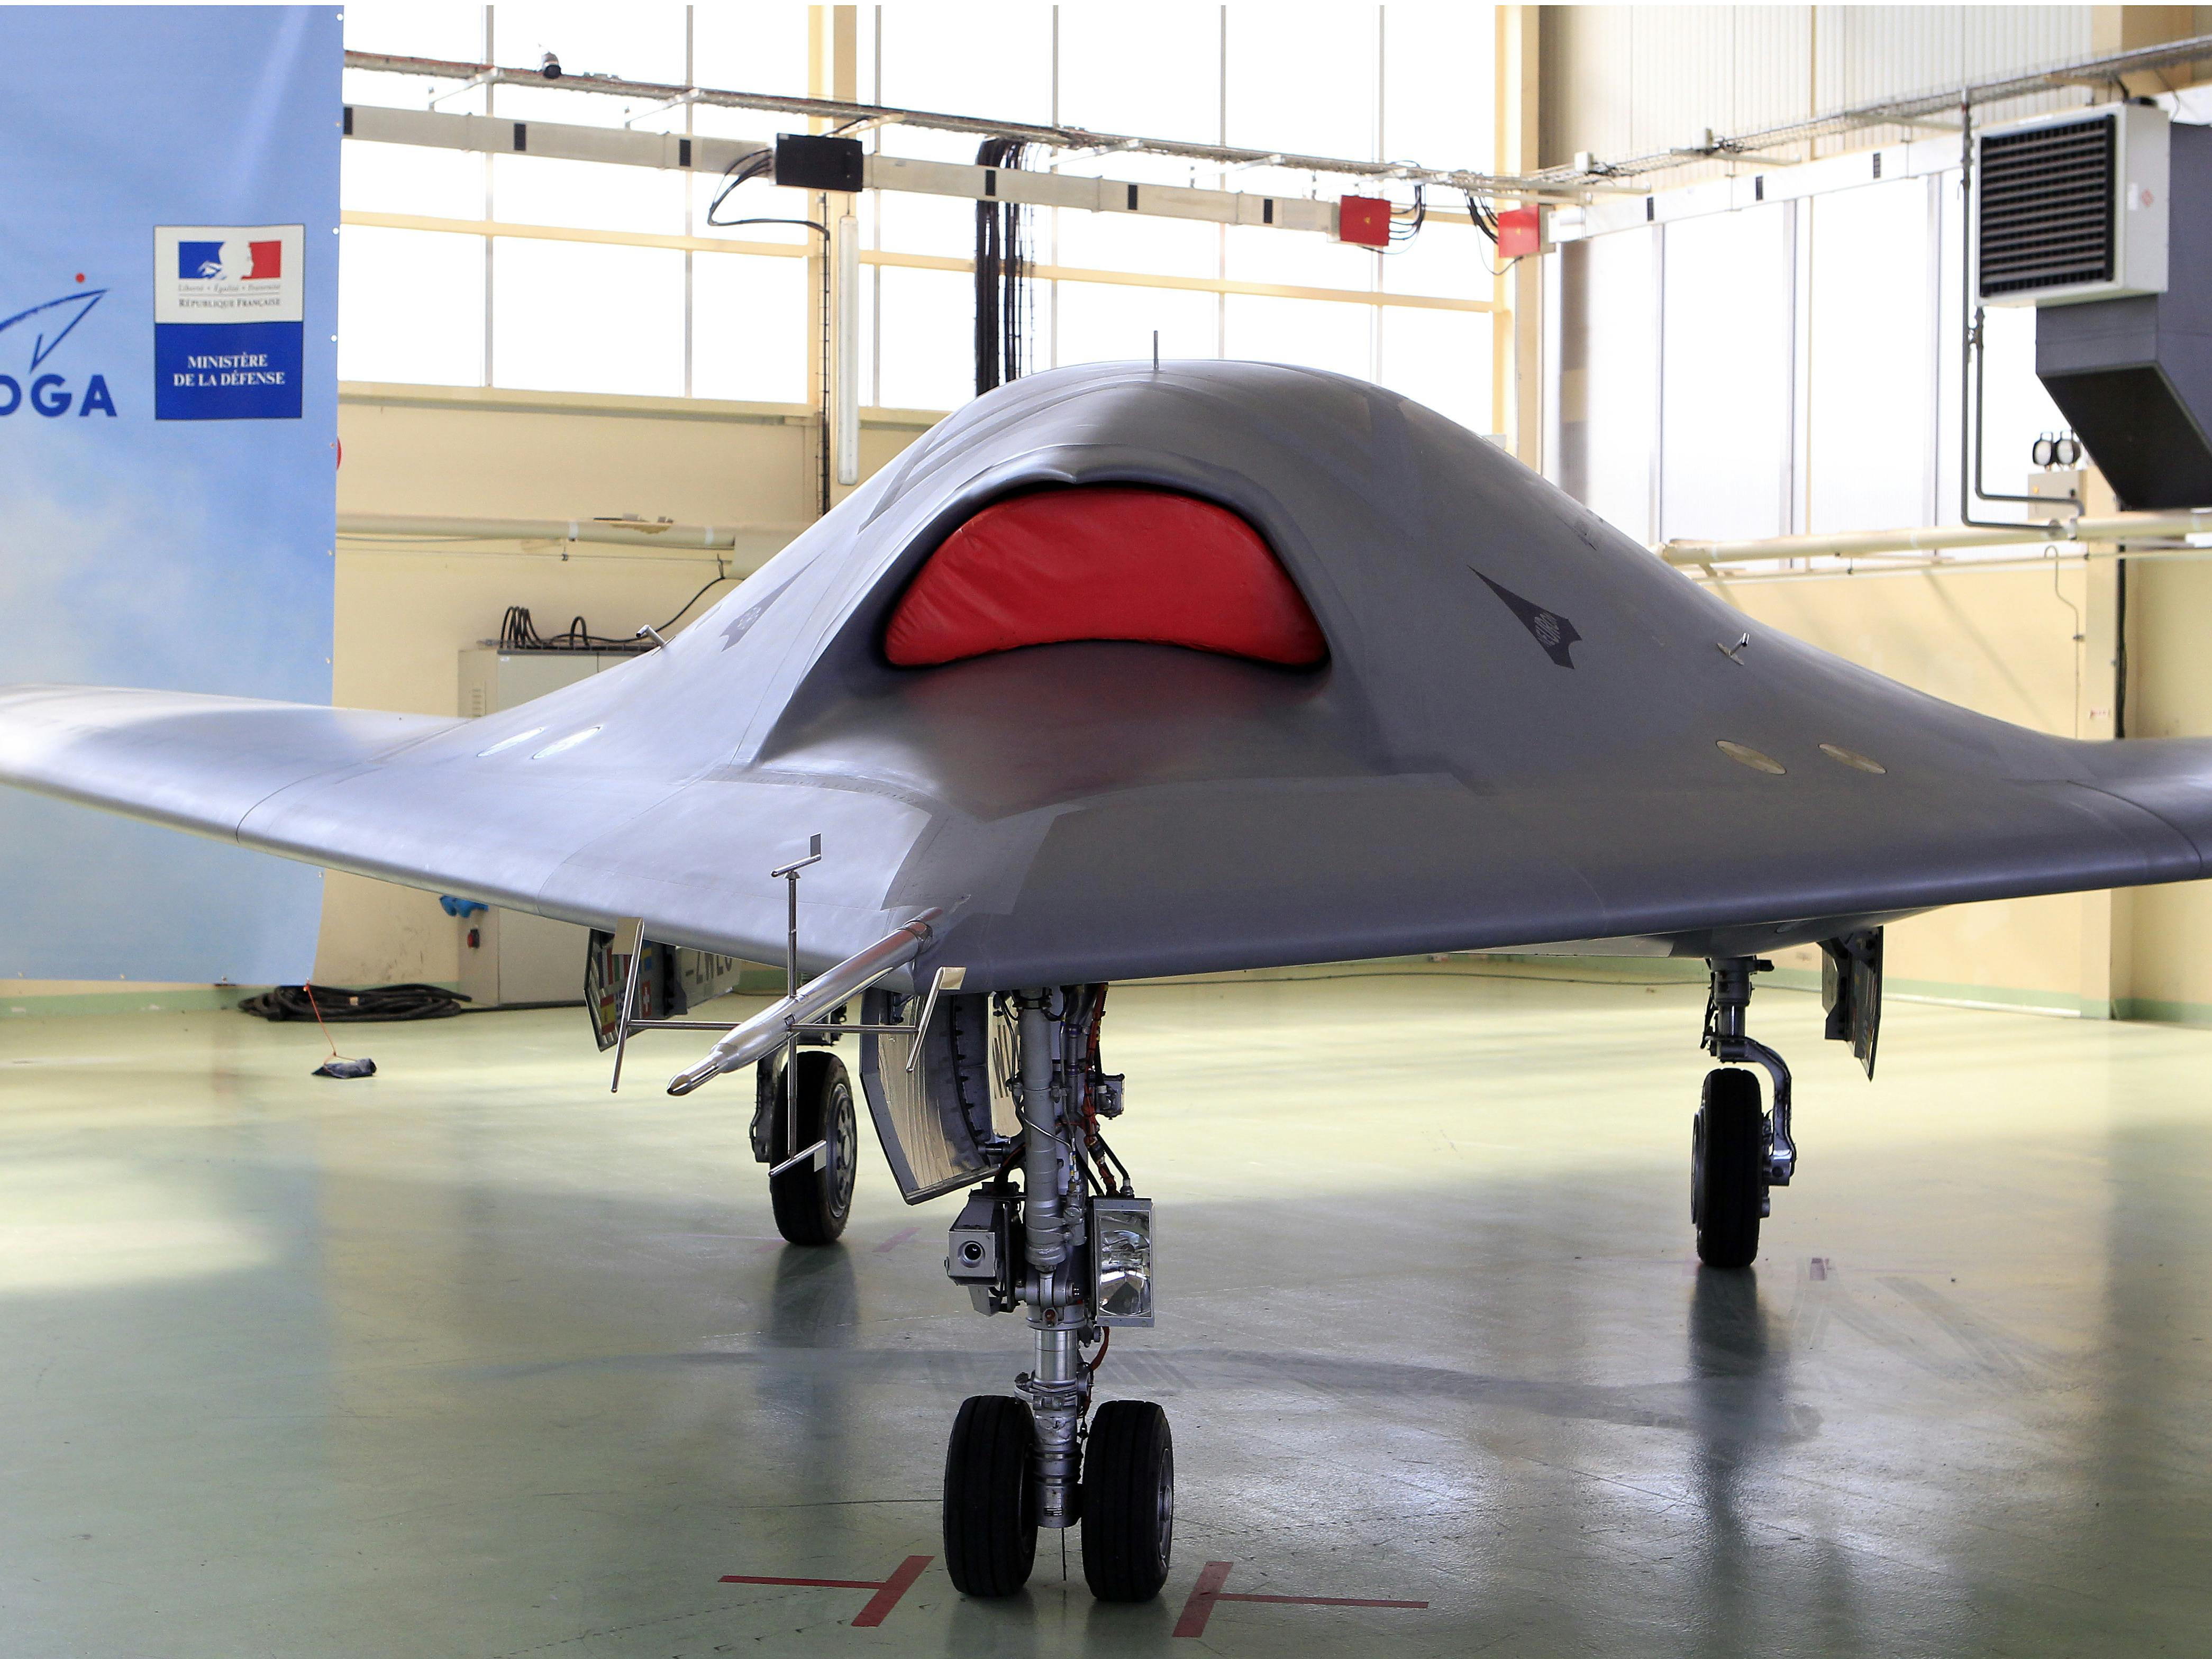 Elon Musk and others warn that military drones could lead to an autonomous arms race.